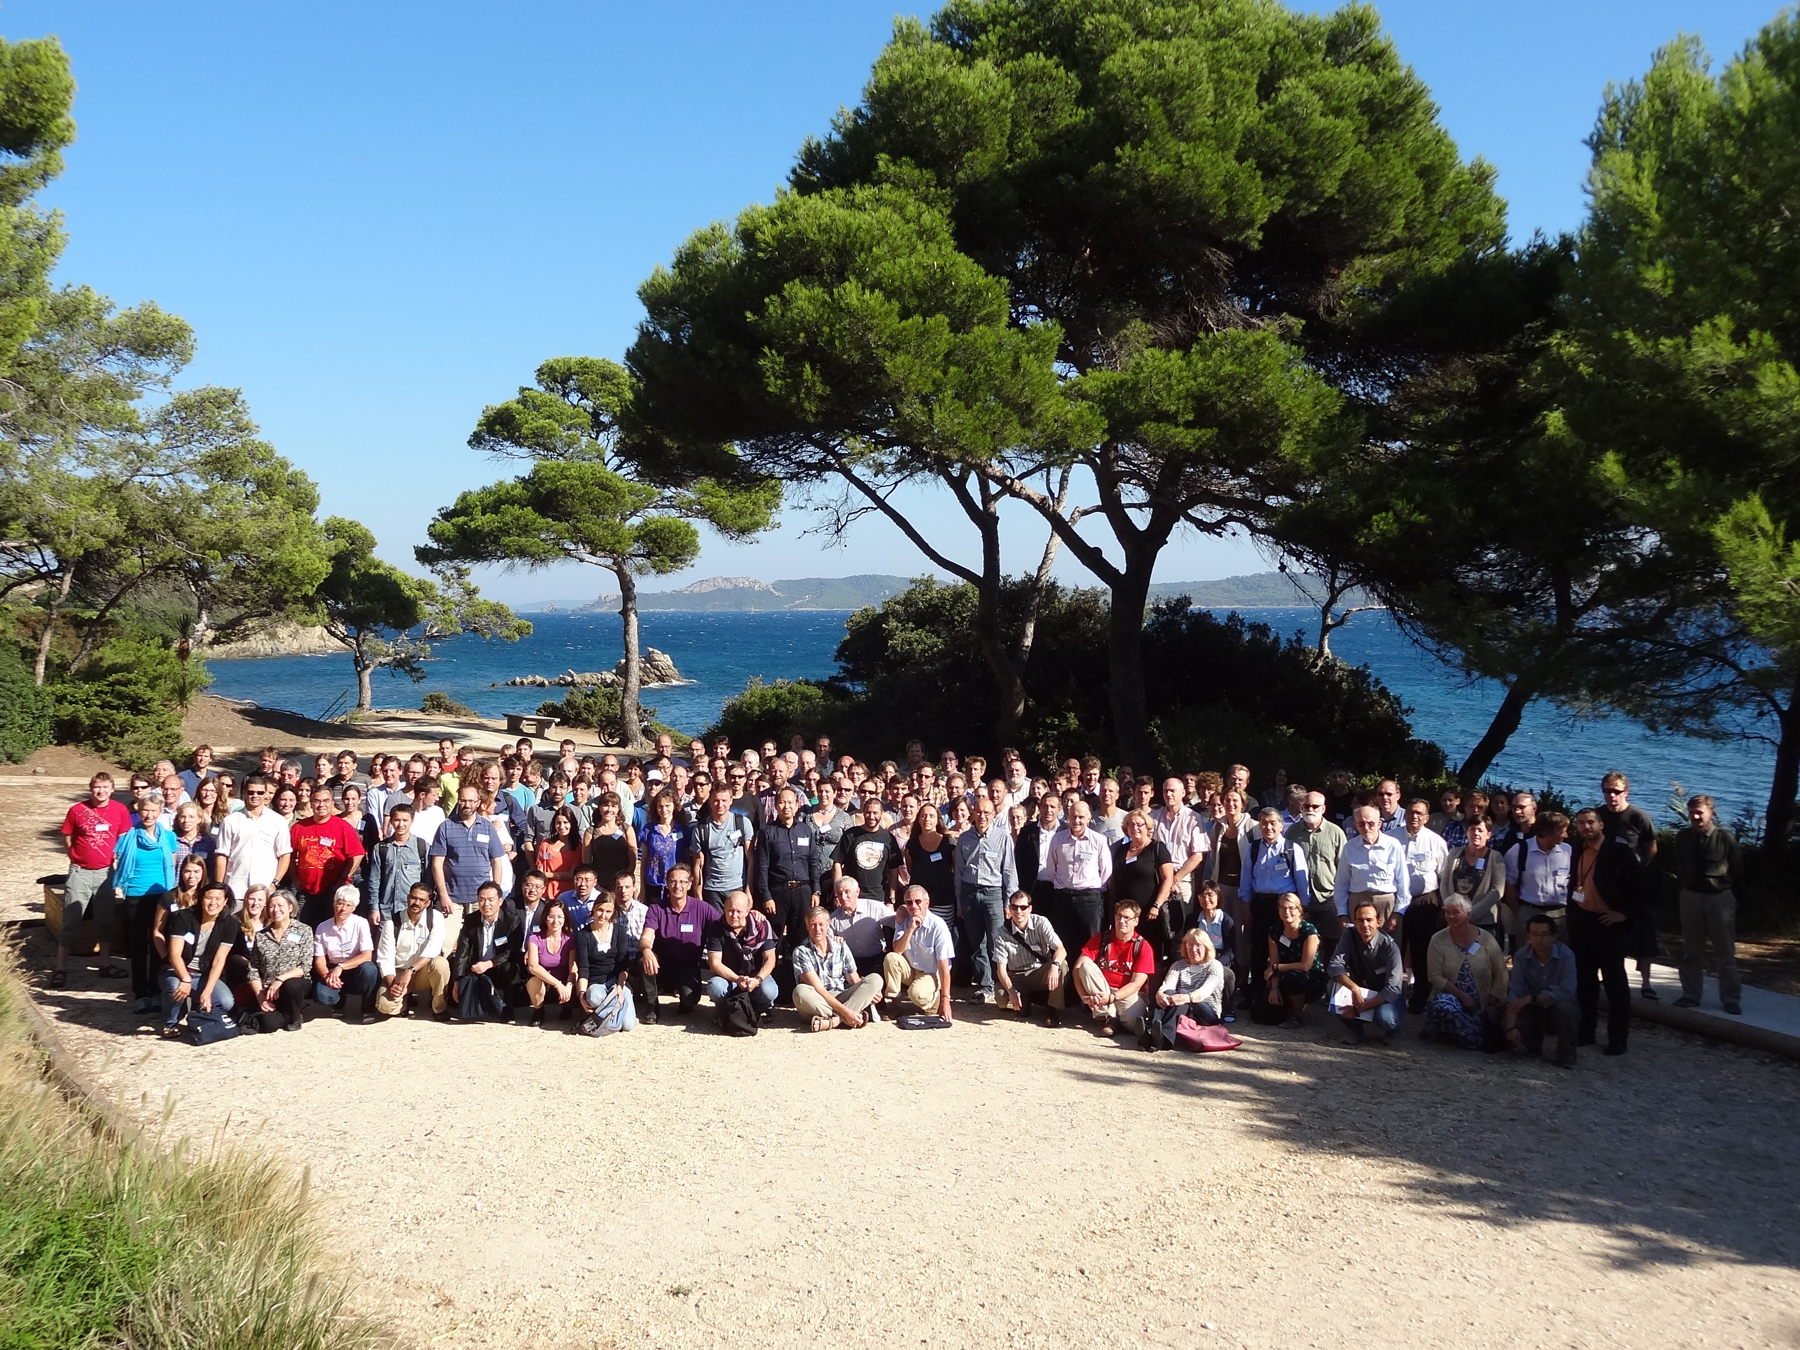 Attendees at the IPICS 2012 Open Science Meeting on the Giens Peninsula, southern France